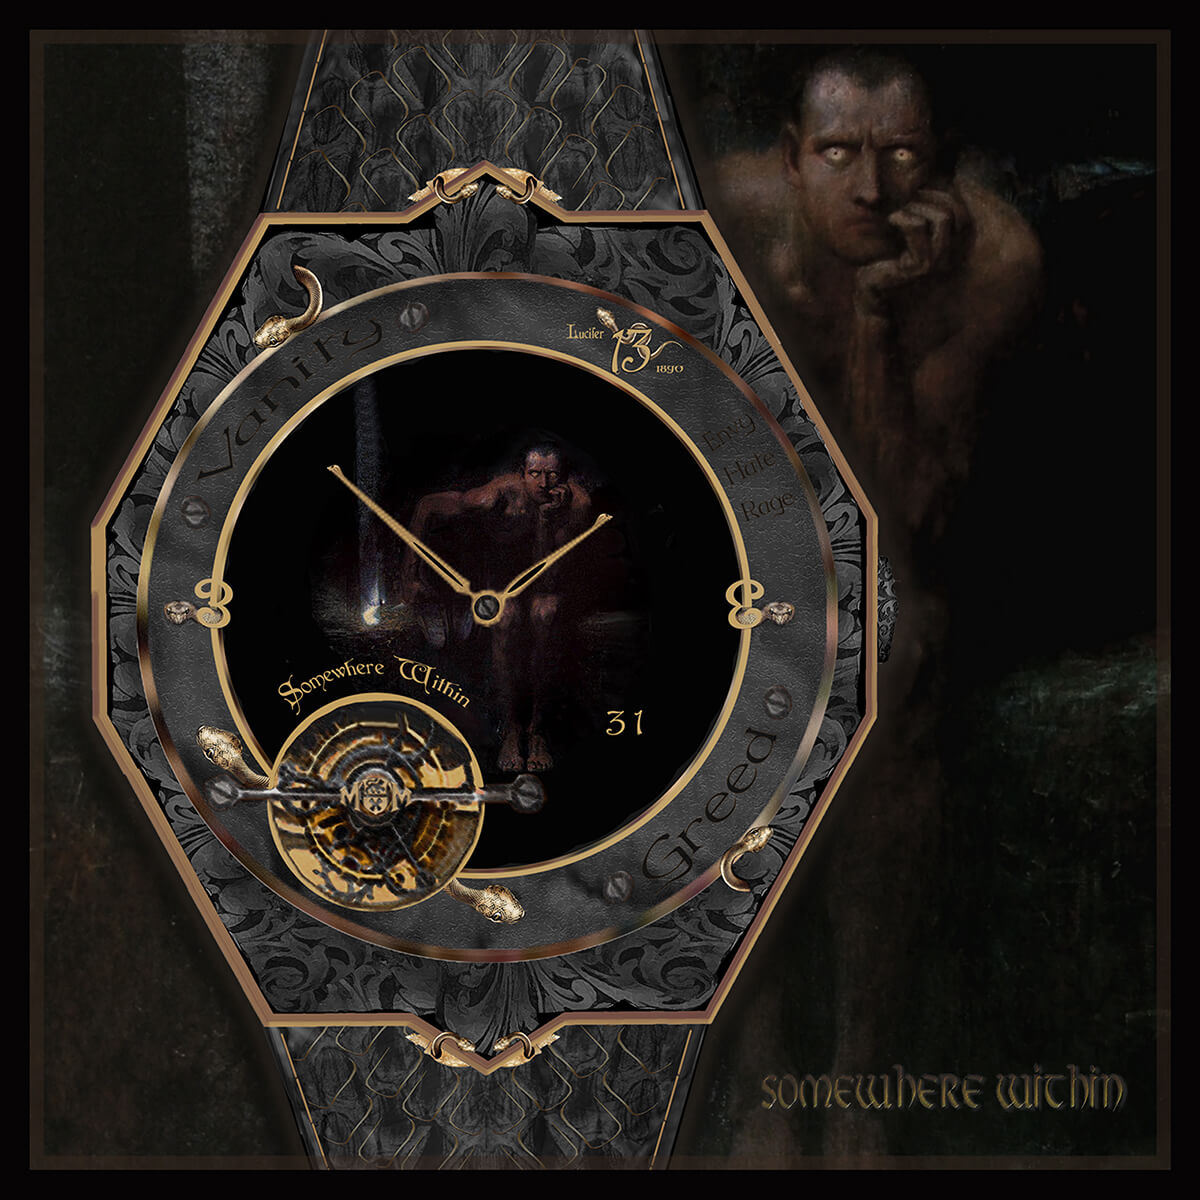 Fantasy watch inspired by a A. Lange & Sonner early 2,000s limited edition over Lucifer by Franz von Stuck (image courtesy @thehealer74)